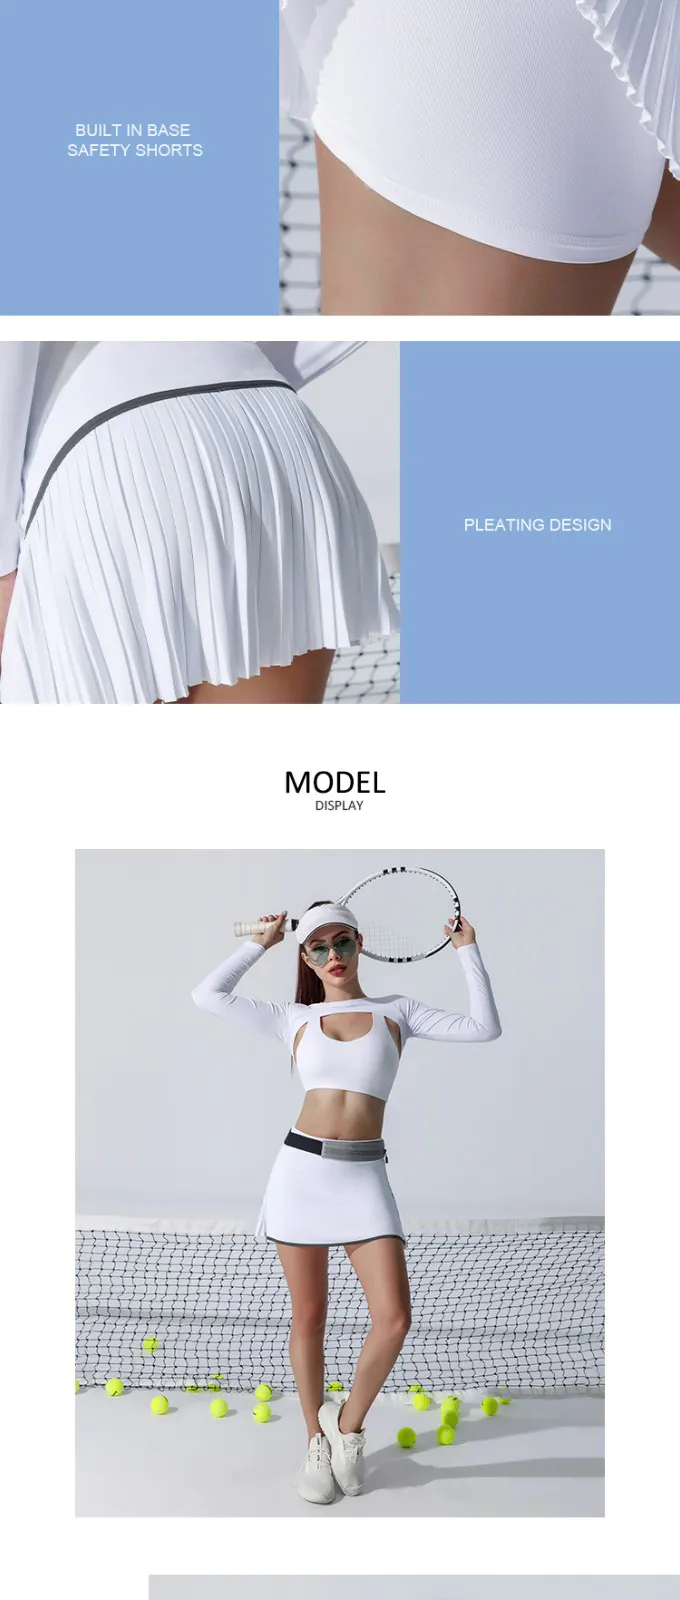 INGOR fashion woman tennis clothes experts for women